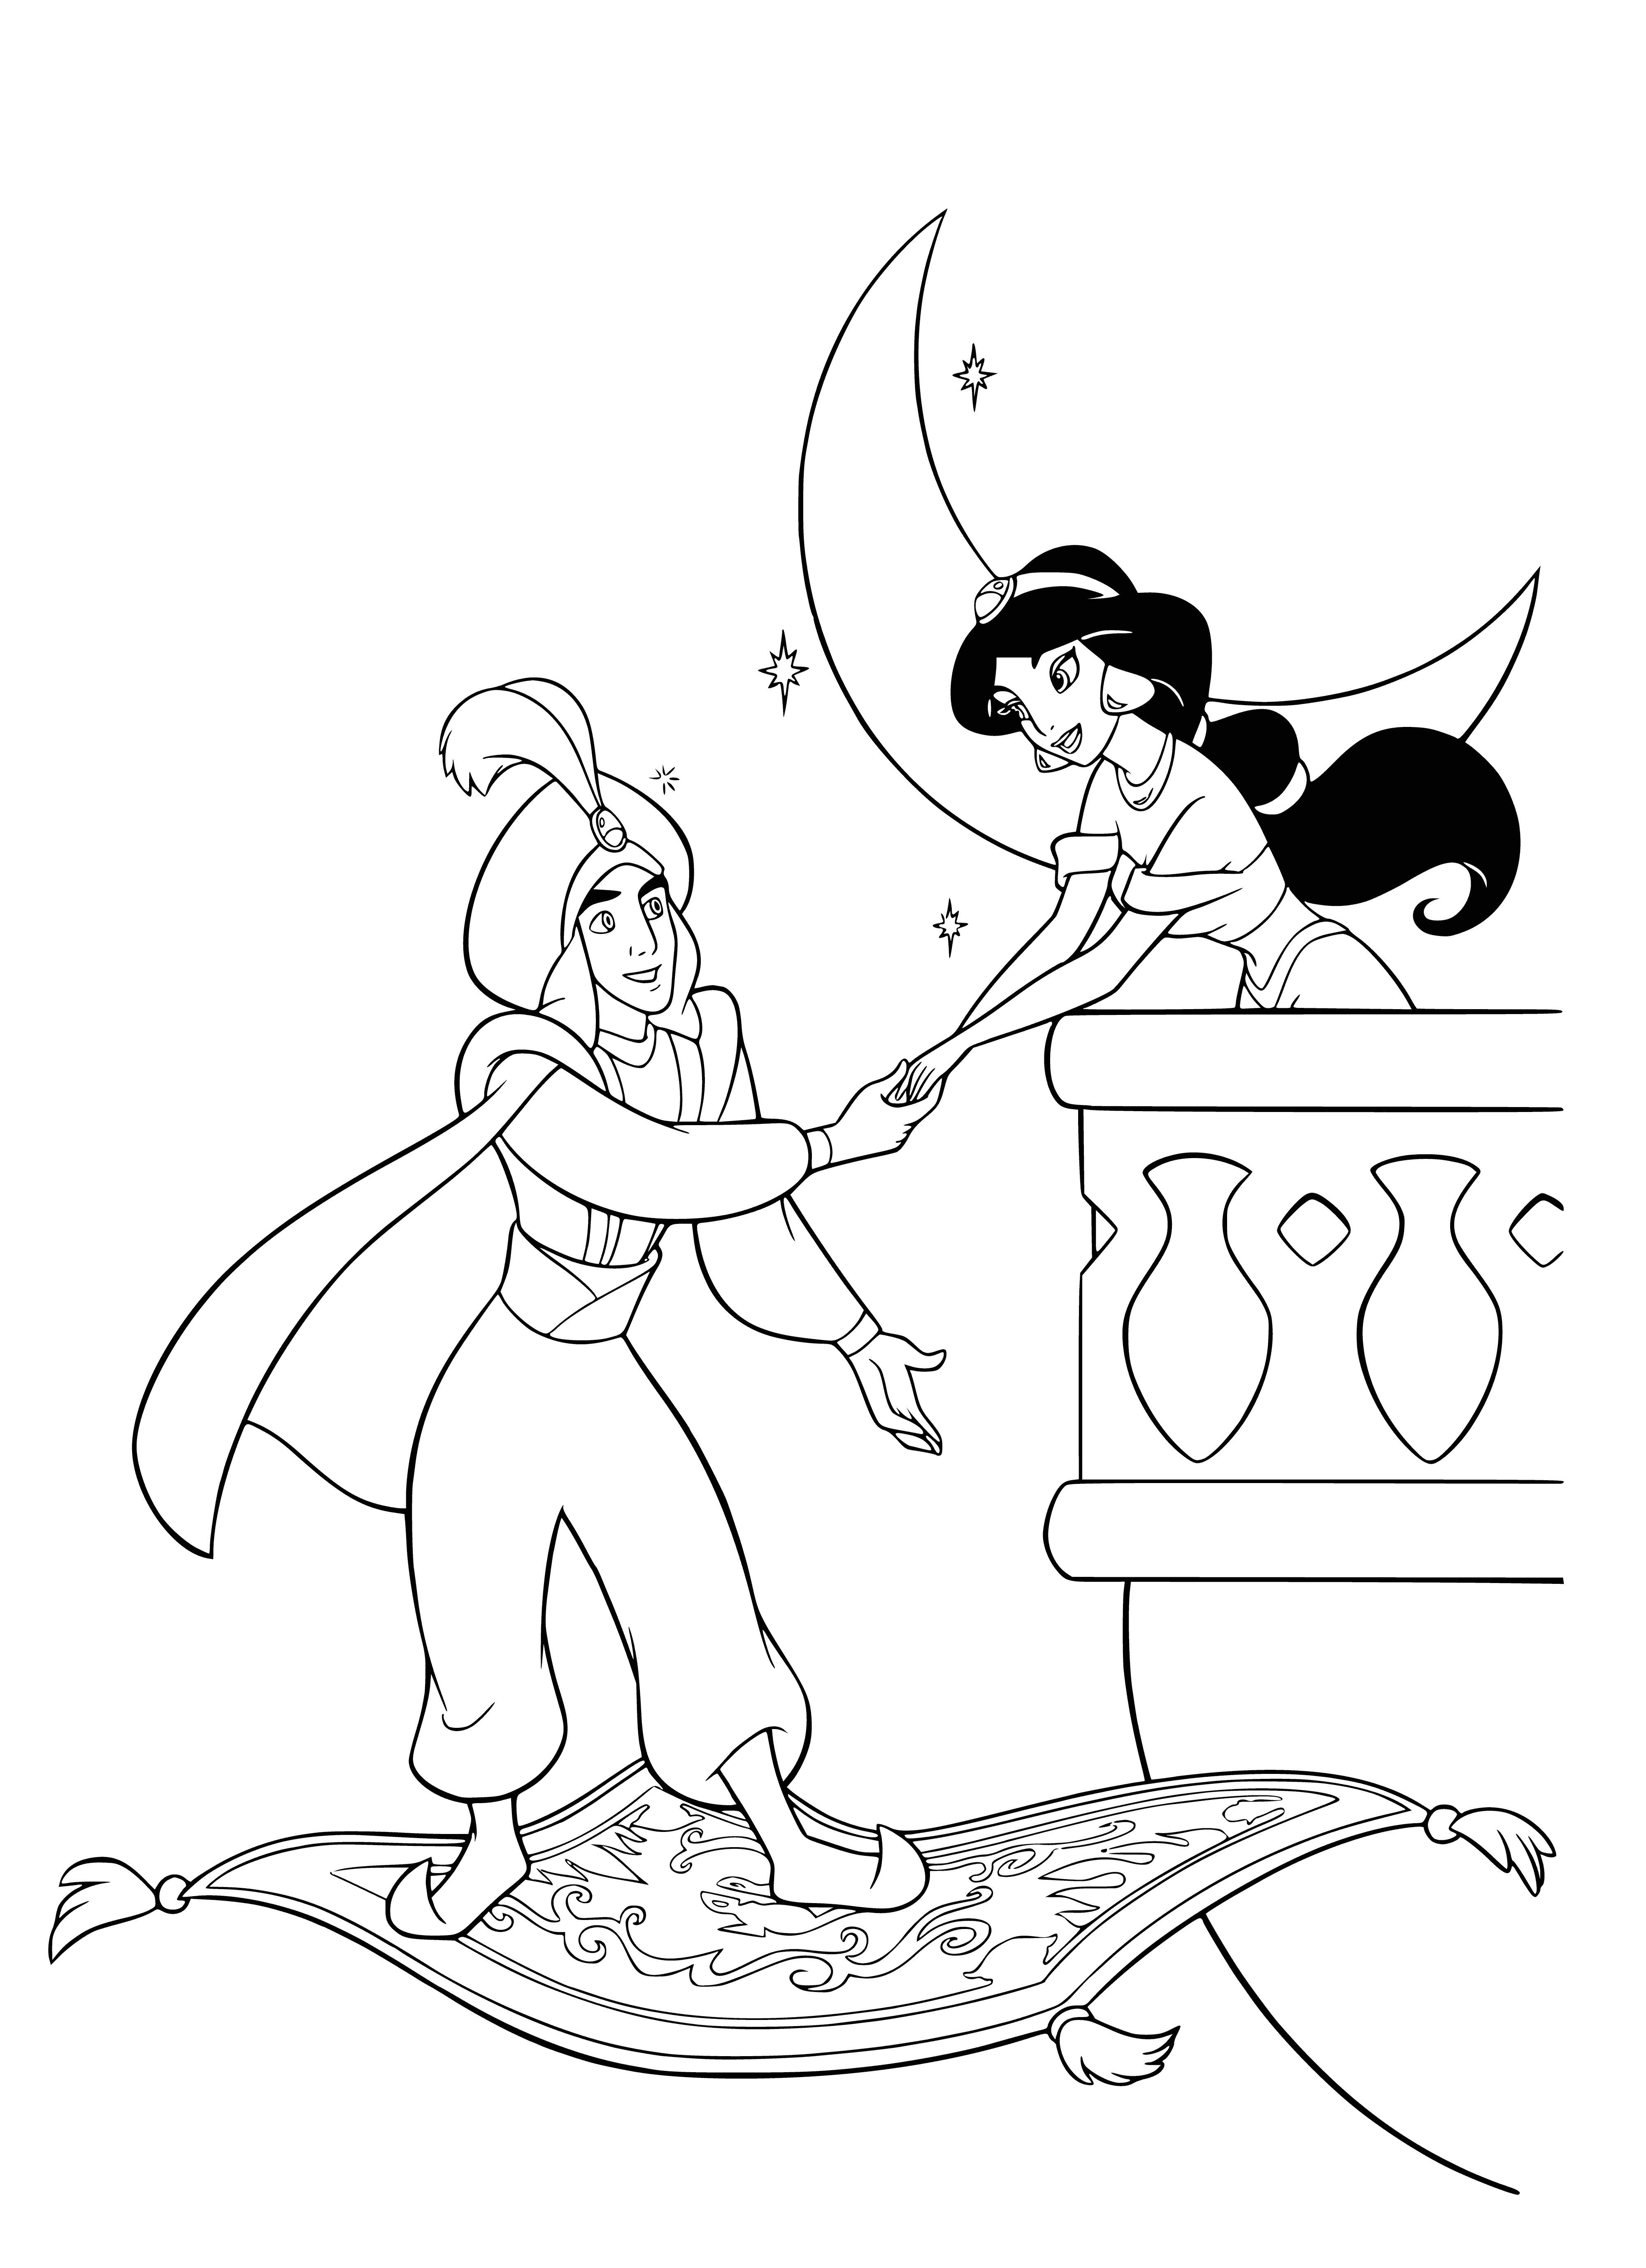 coloring page: Aladdin and Jasmine, hand in hand, look lovingly into each other's eyes, filled with joy and a bright future ahead.